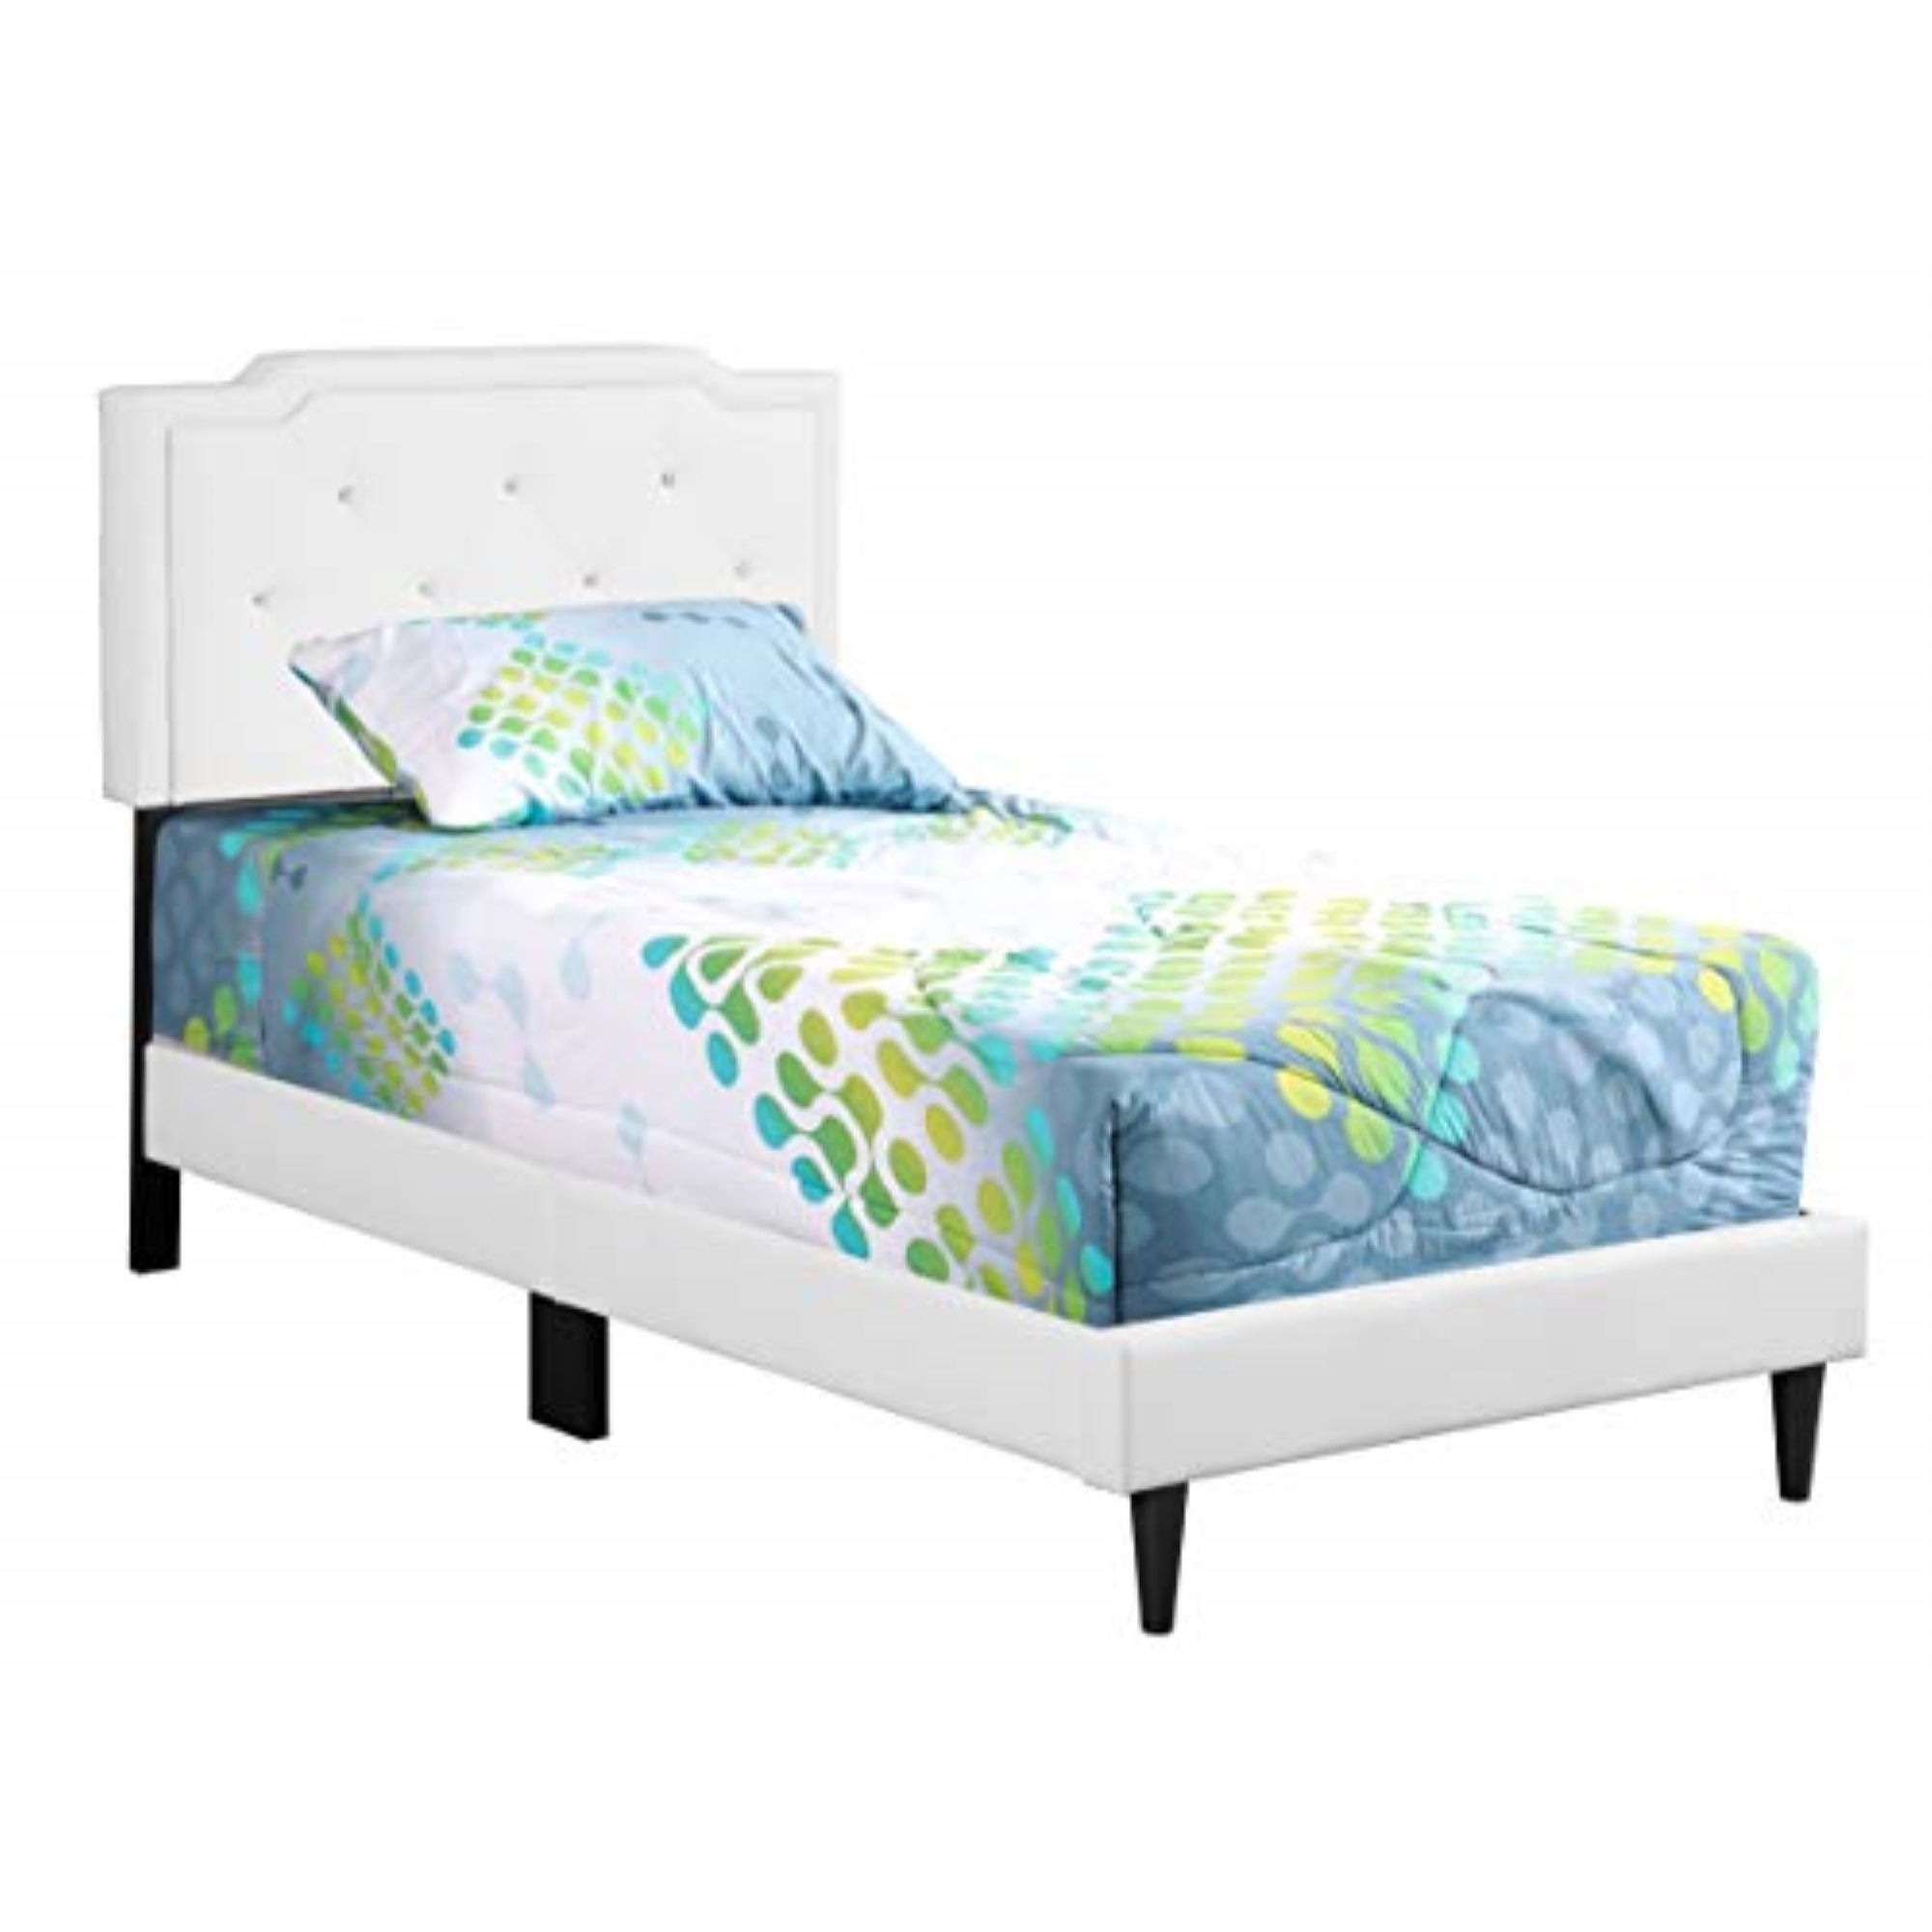 Ergode Conveniently Shipped All-in-One Bed with Headboard, Footboard, and Rails - Supports Mattress and Box Spring - Choose Twi